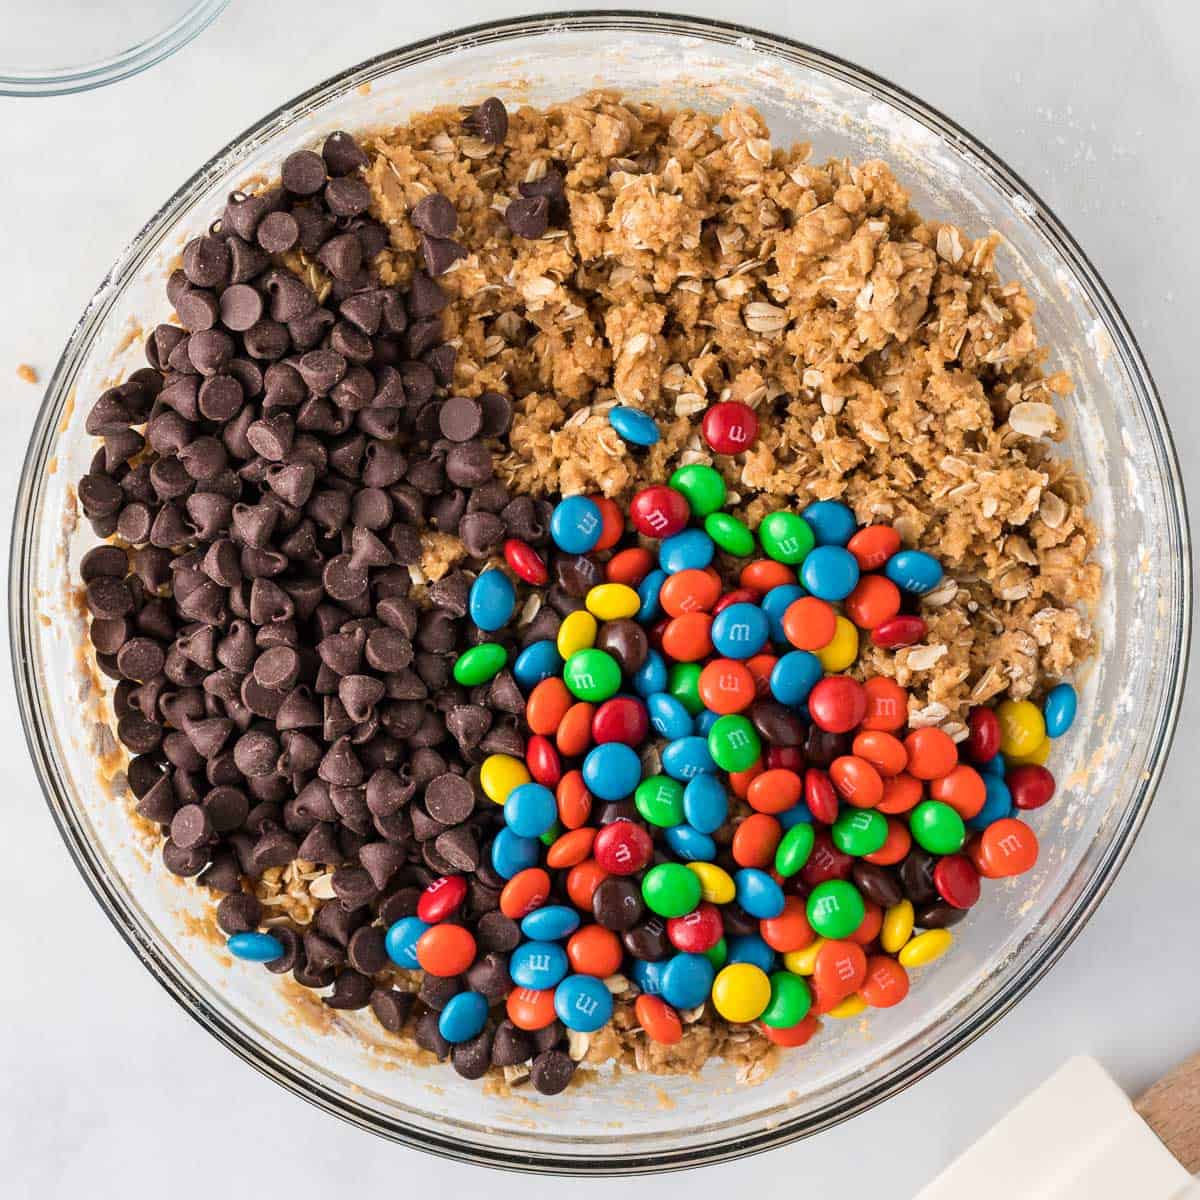 adding the chocolate chips and M&M's to the batter